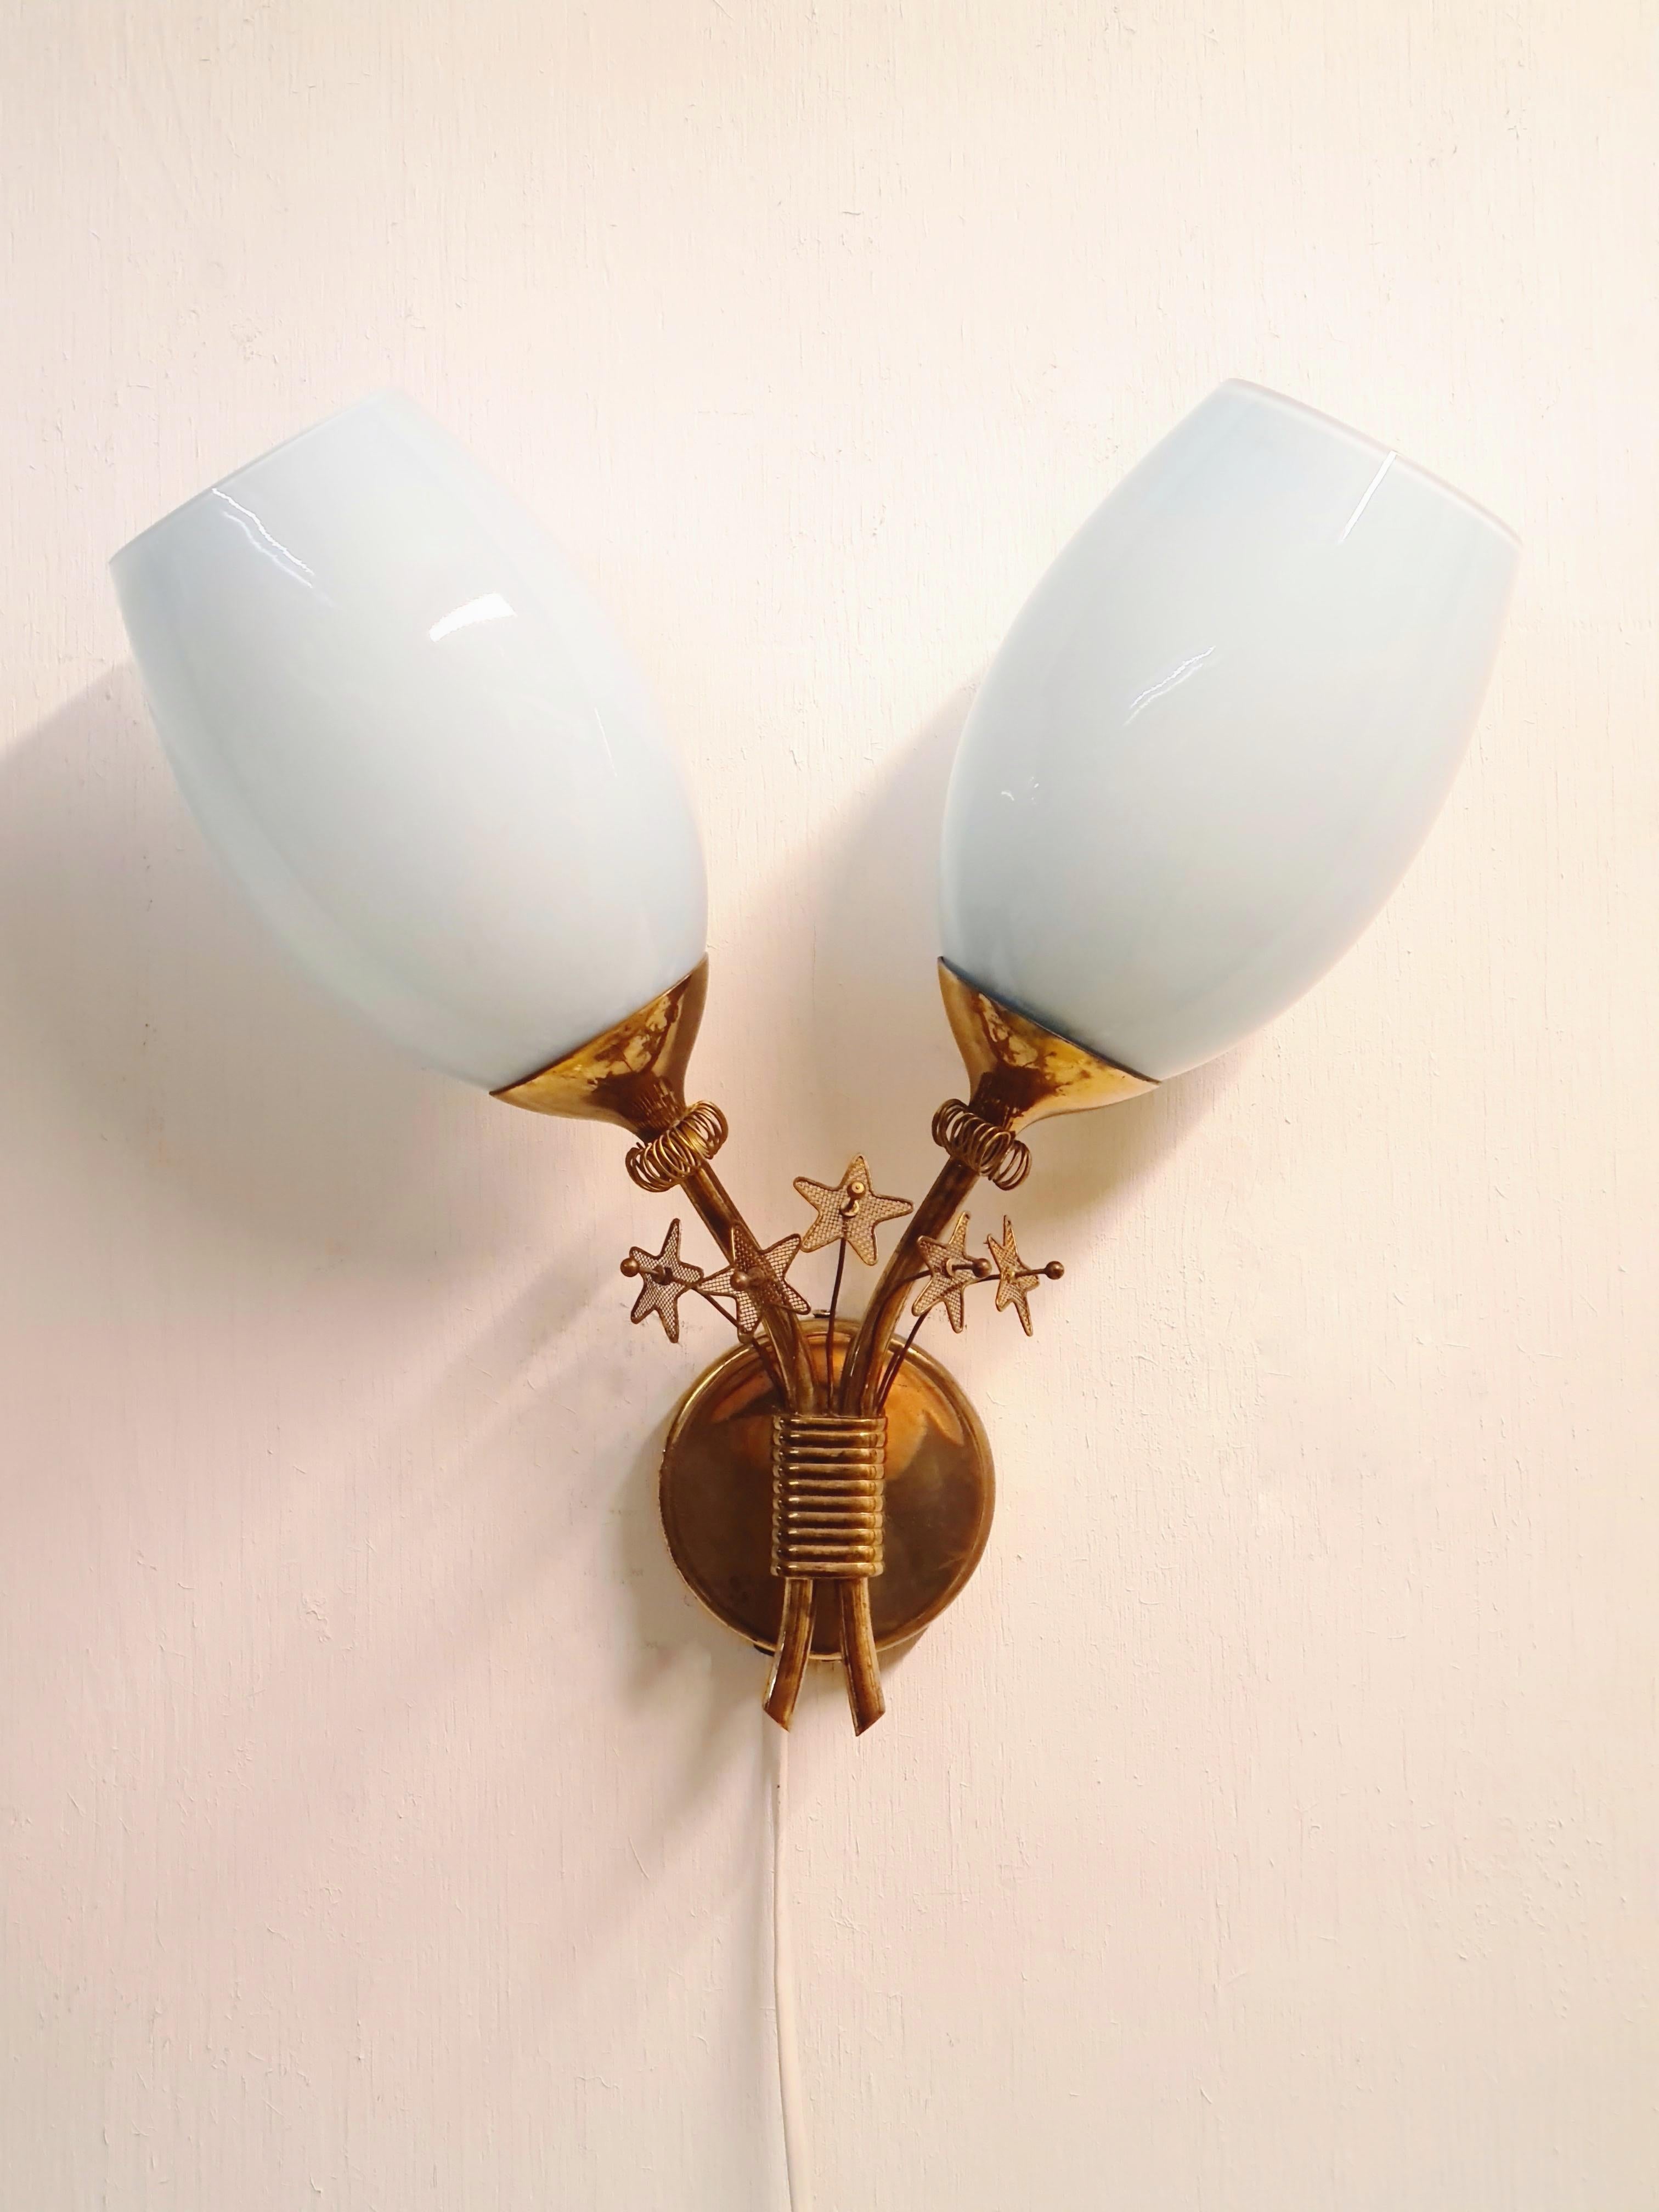 Rare Paavo Tynell Wall Lamp, Taito Oy 1950s For Sale 3